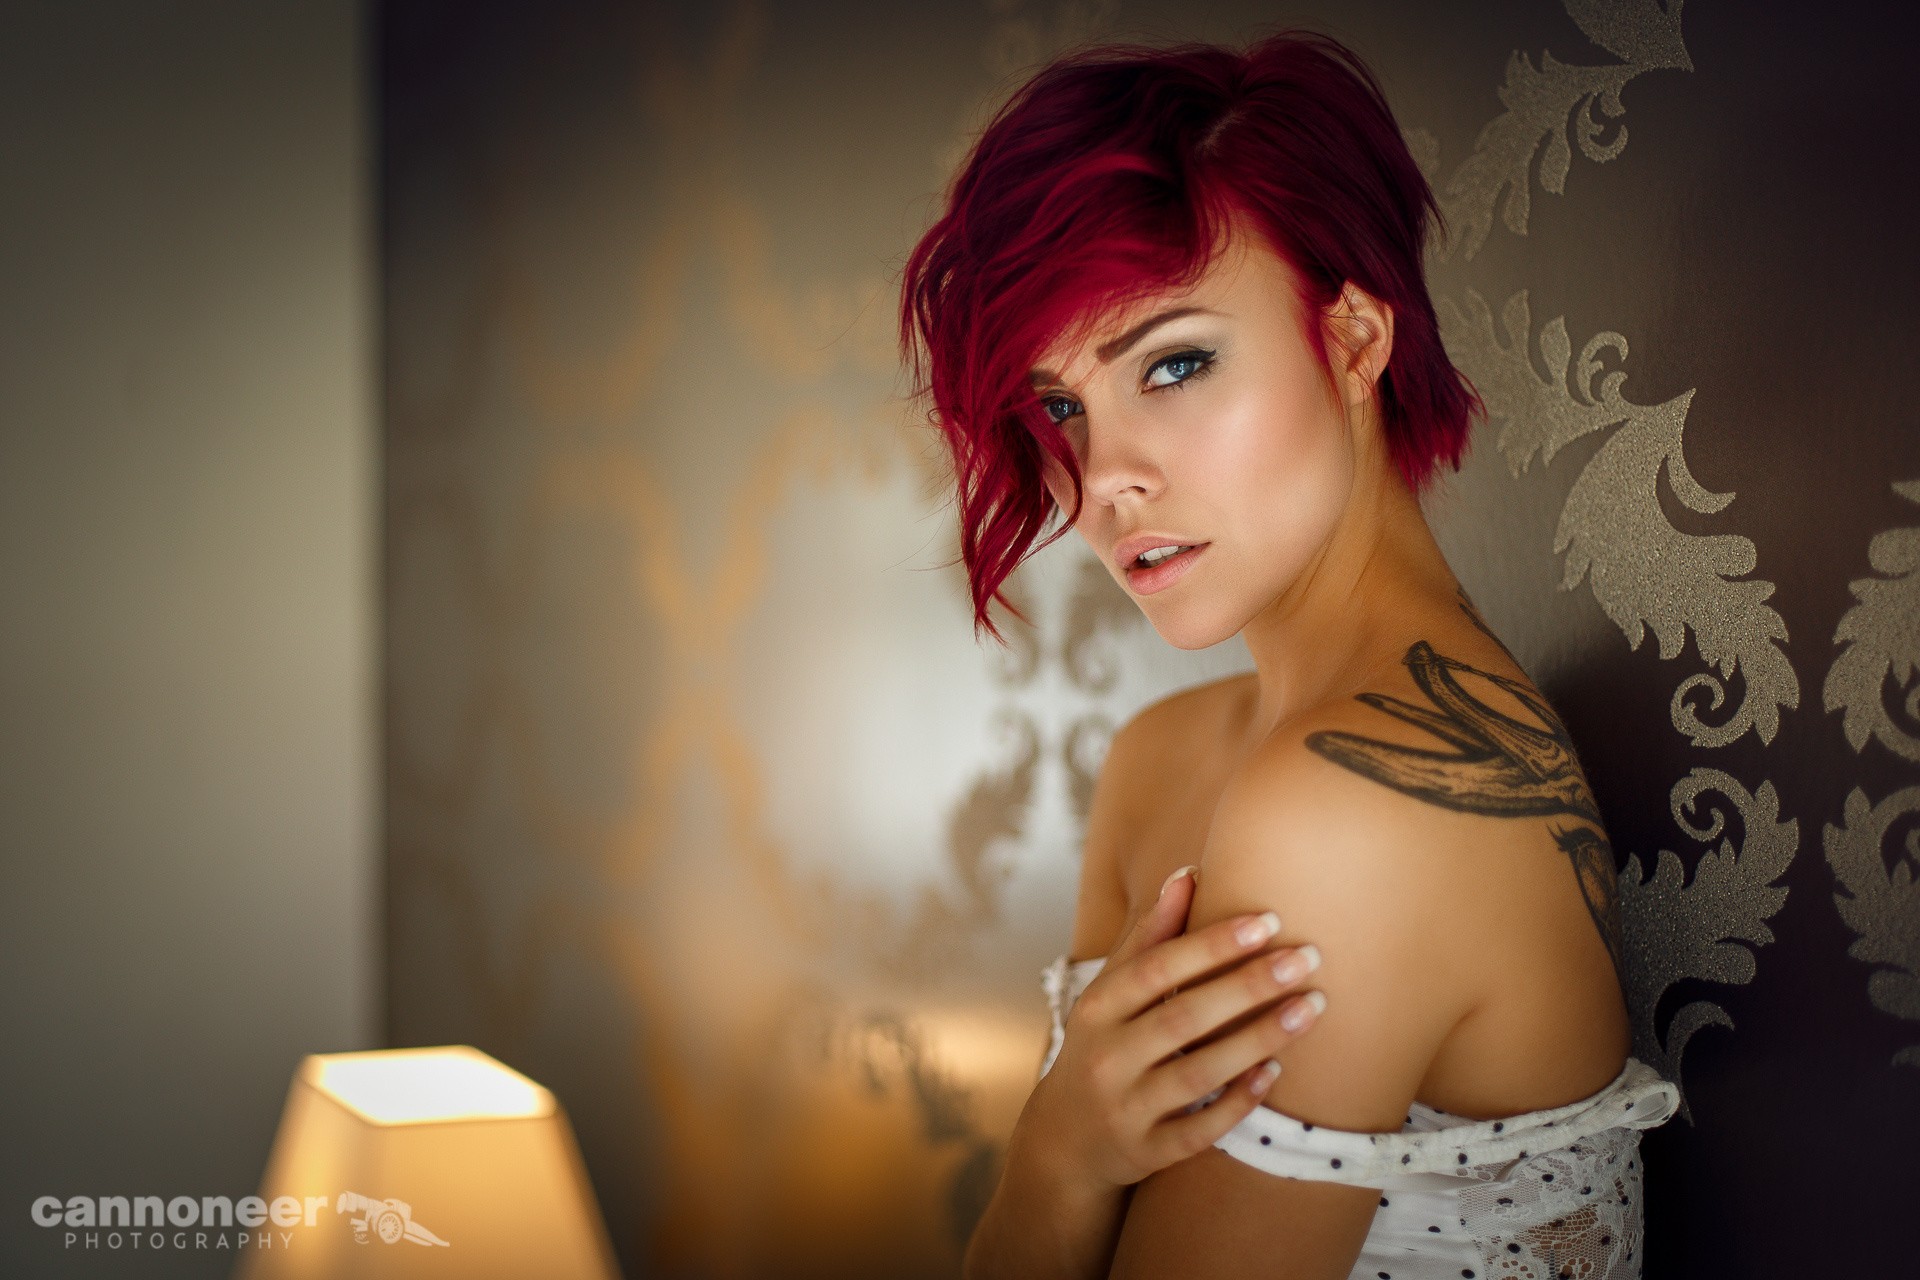 Women Redhead Face Dyed Hair Blue Eyes Bare Shoulders Tattoo Tanned Portrait Undressing Short Hair 1920x1280